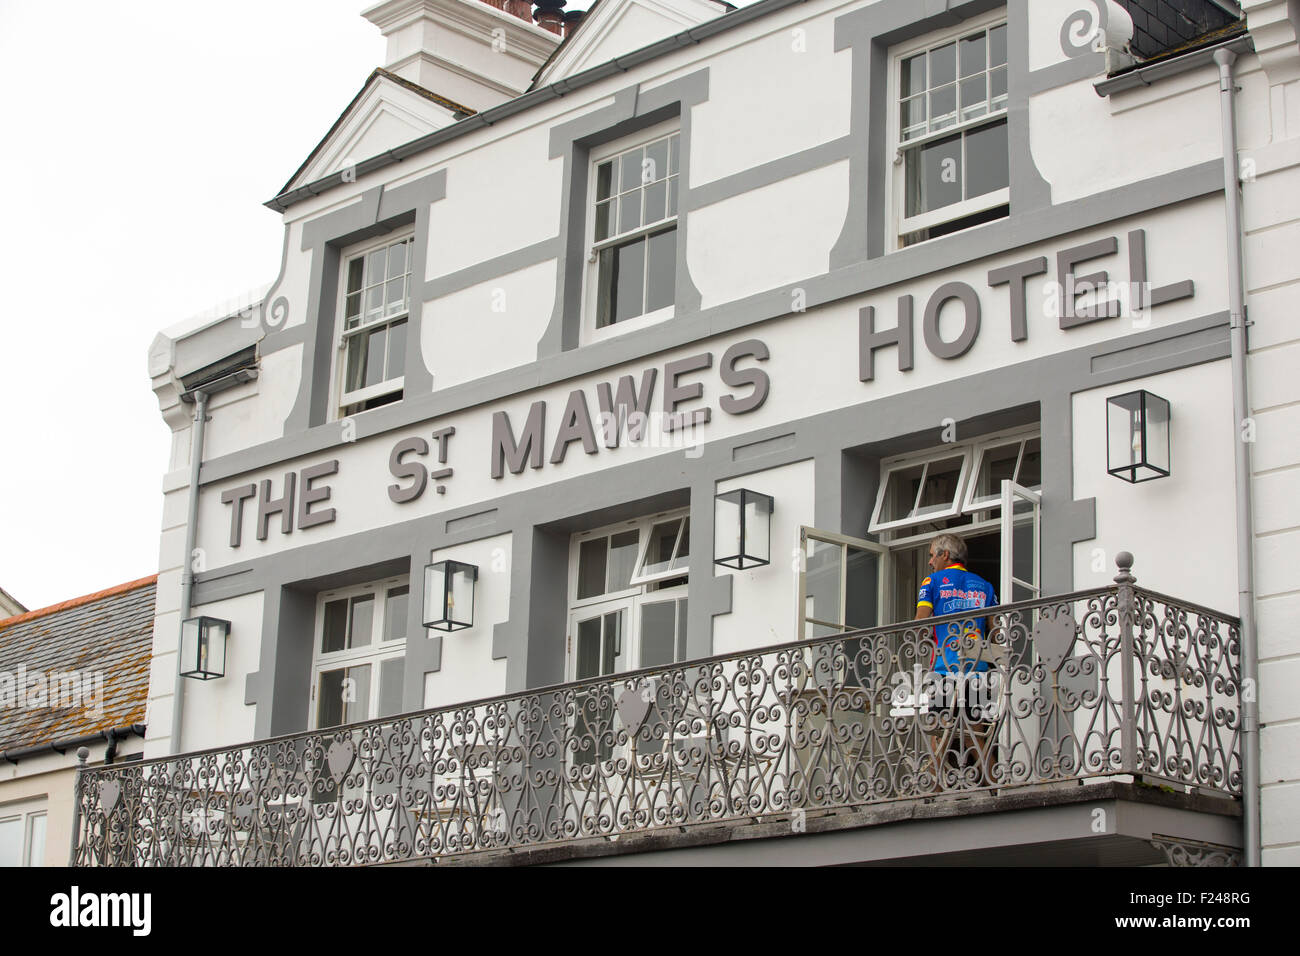 The St Mawes Hotel in St Mawes, Cornwall, UK. Stock Photo